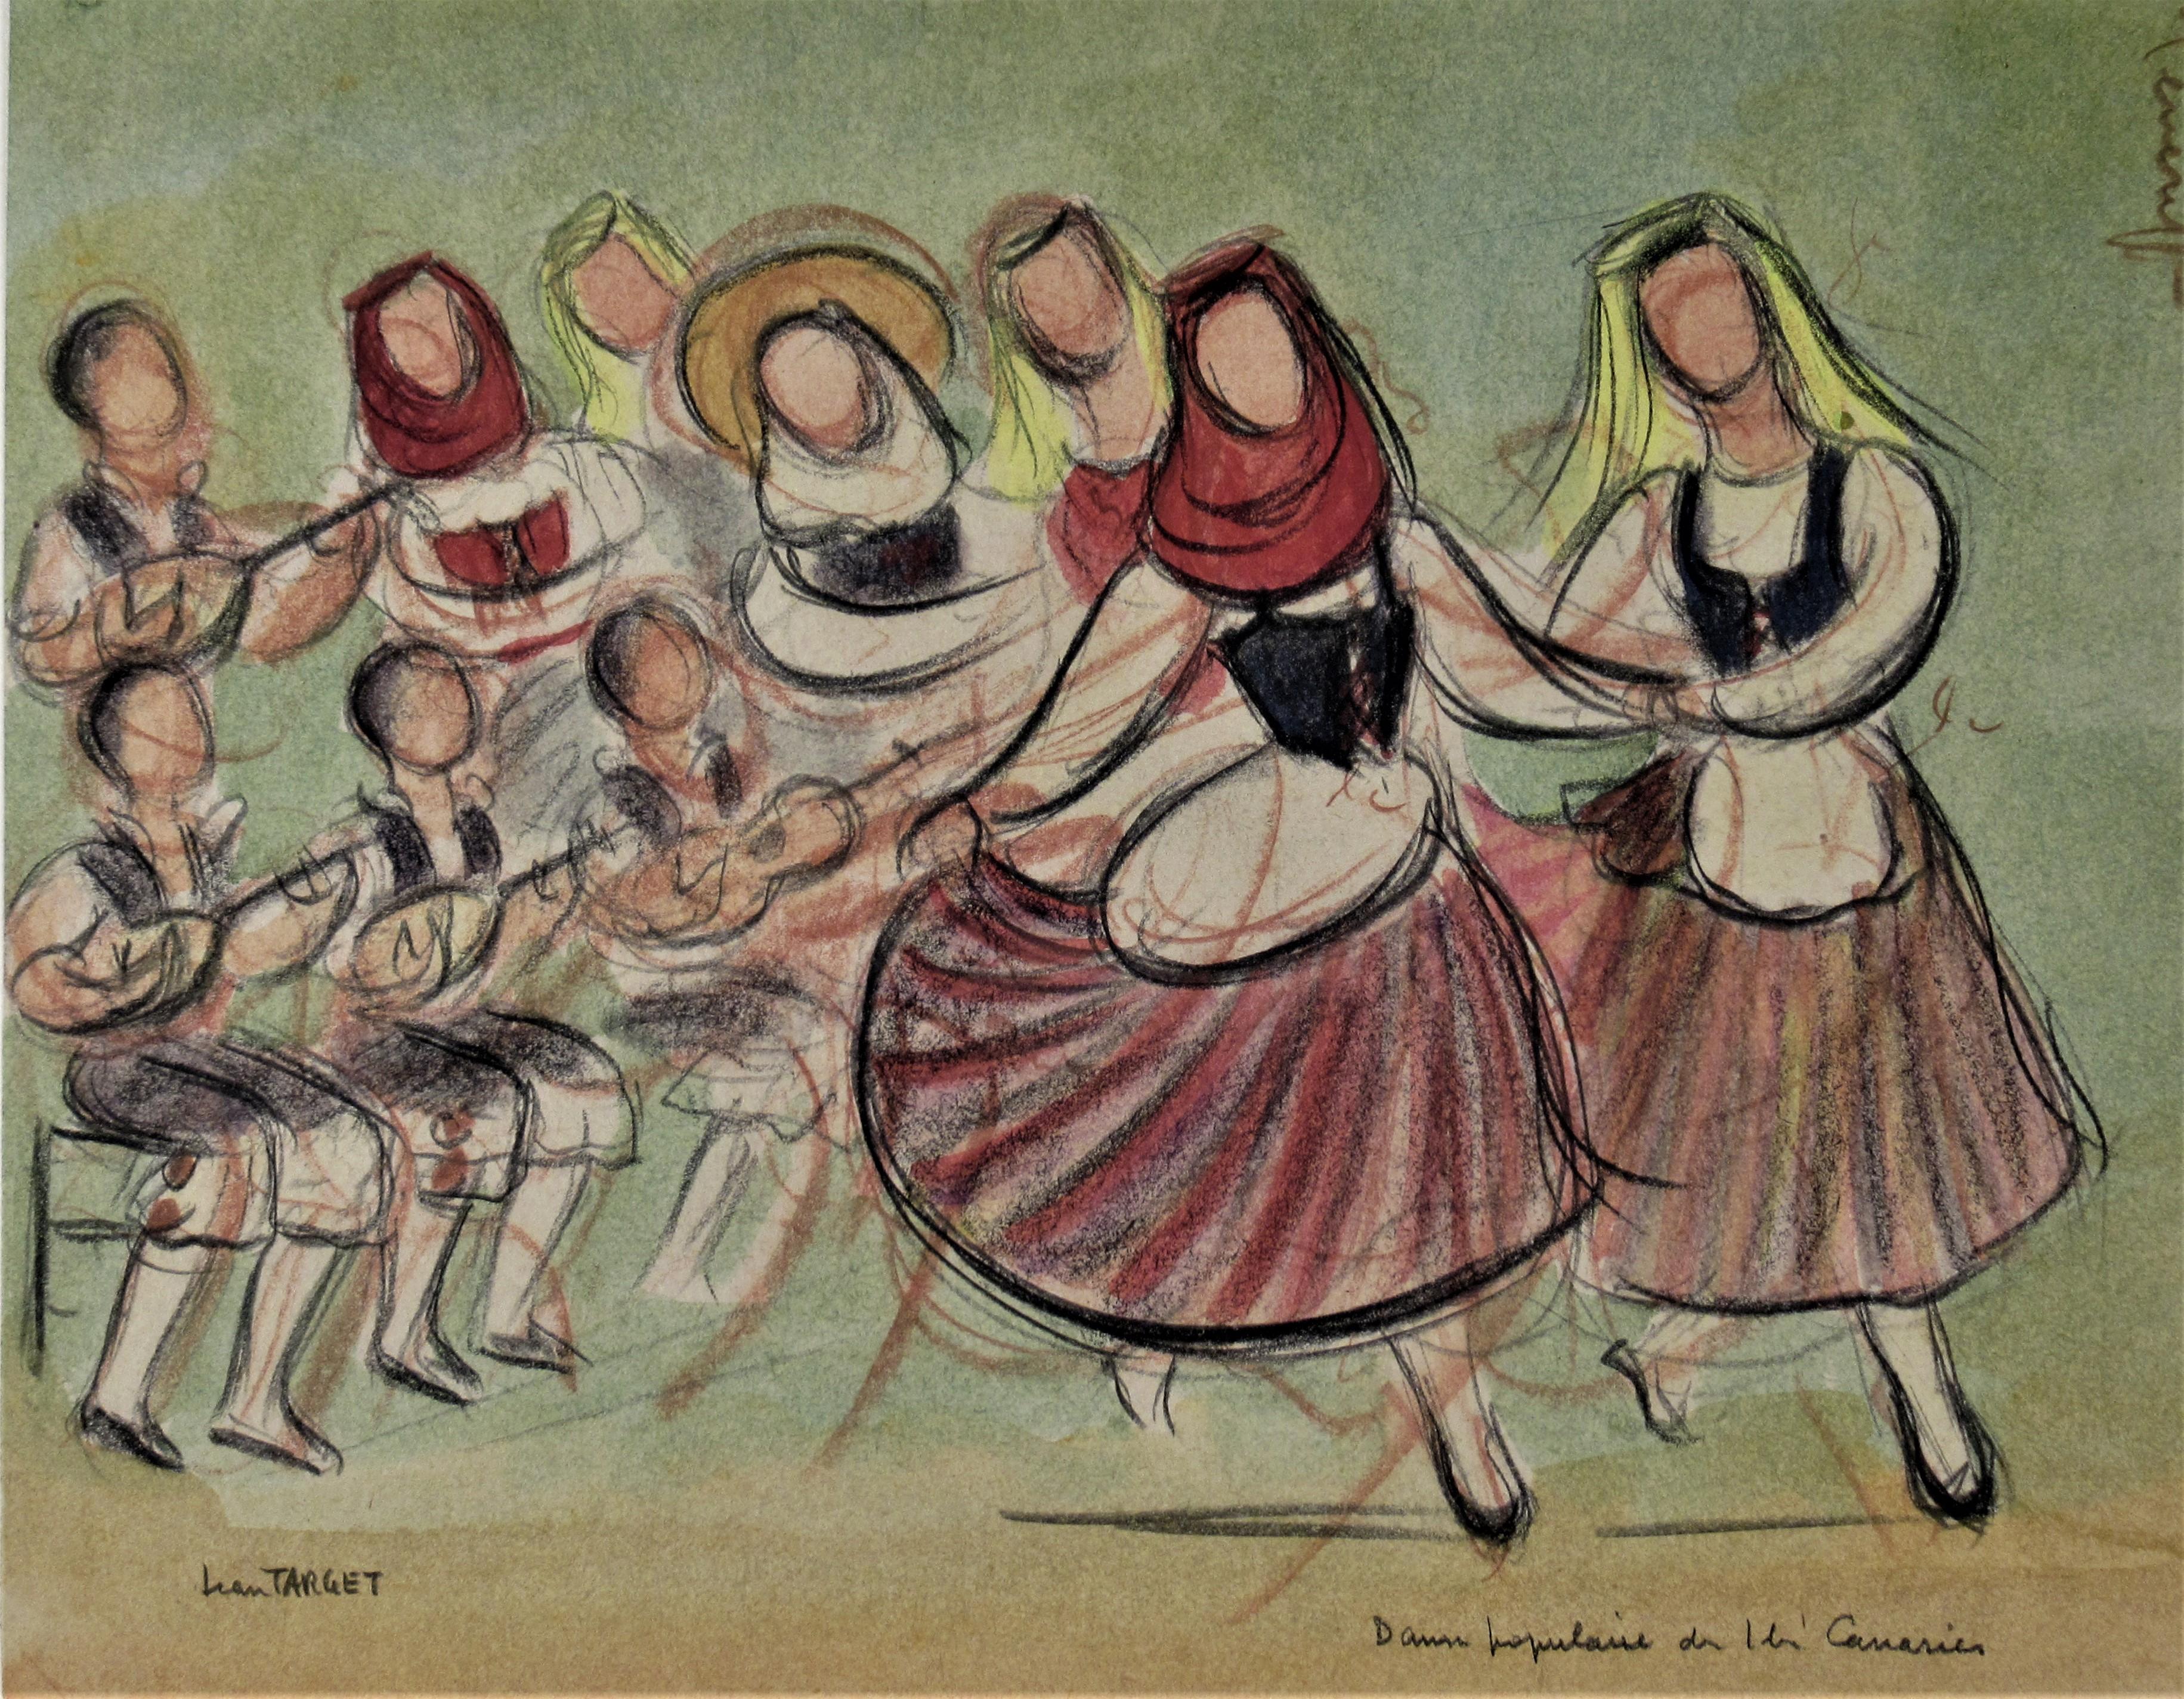 Jean Target Figurative Art - Danse populaire des Isles Canaries (Dance Popular from the Canaries Islands) 